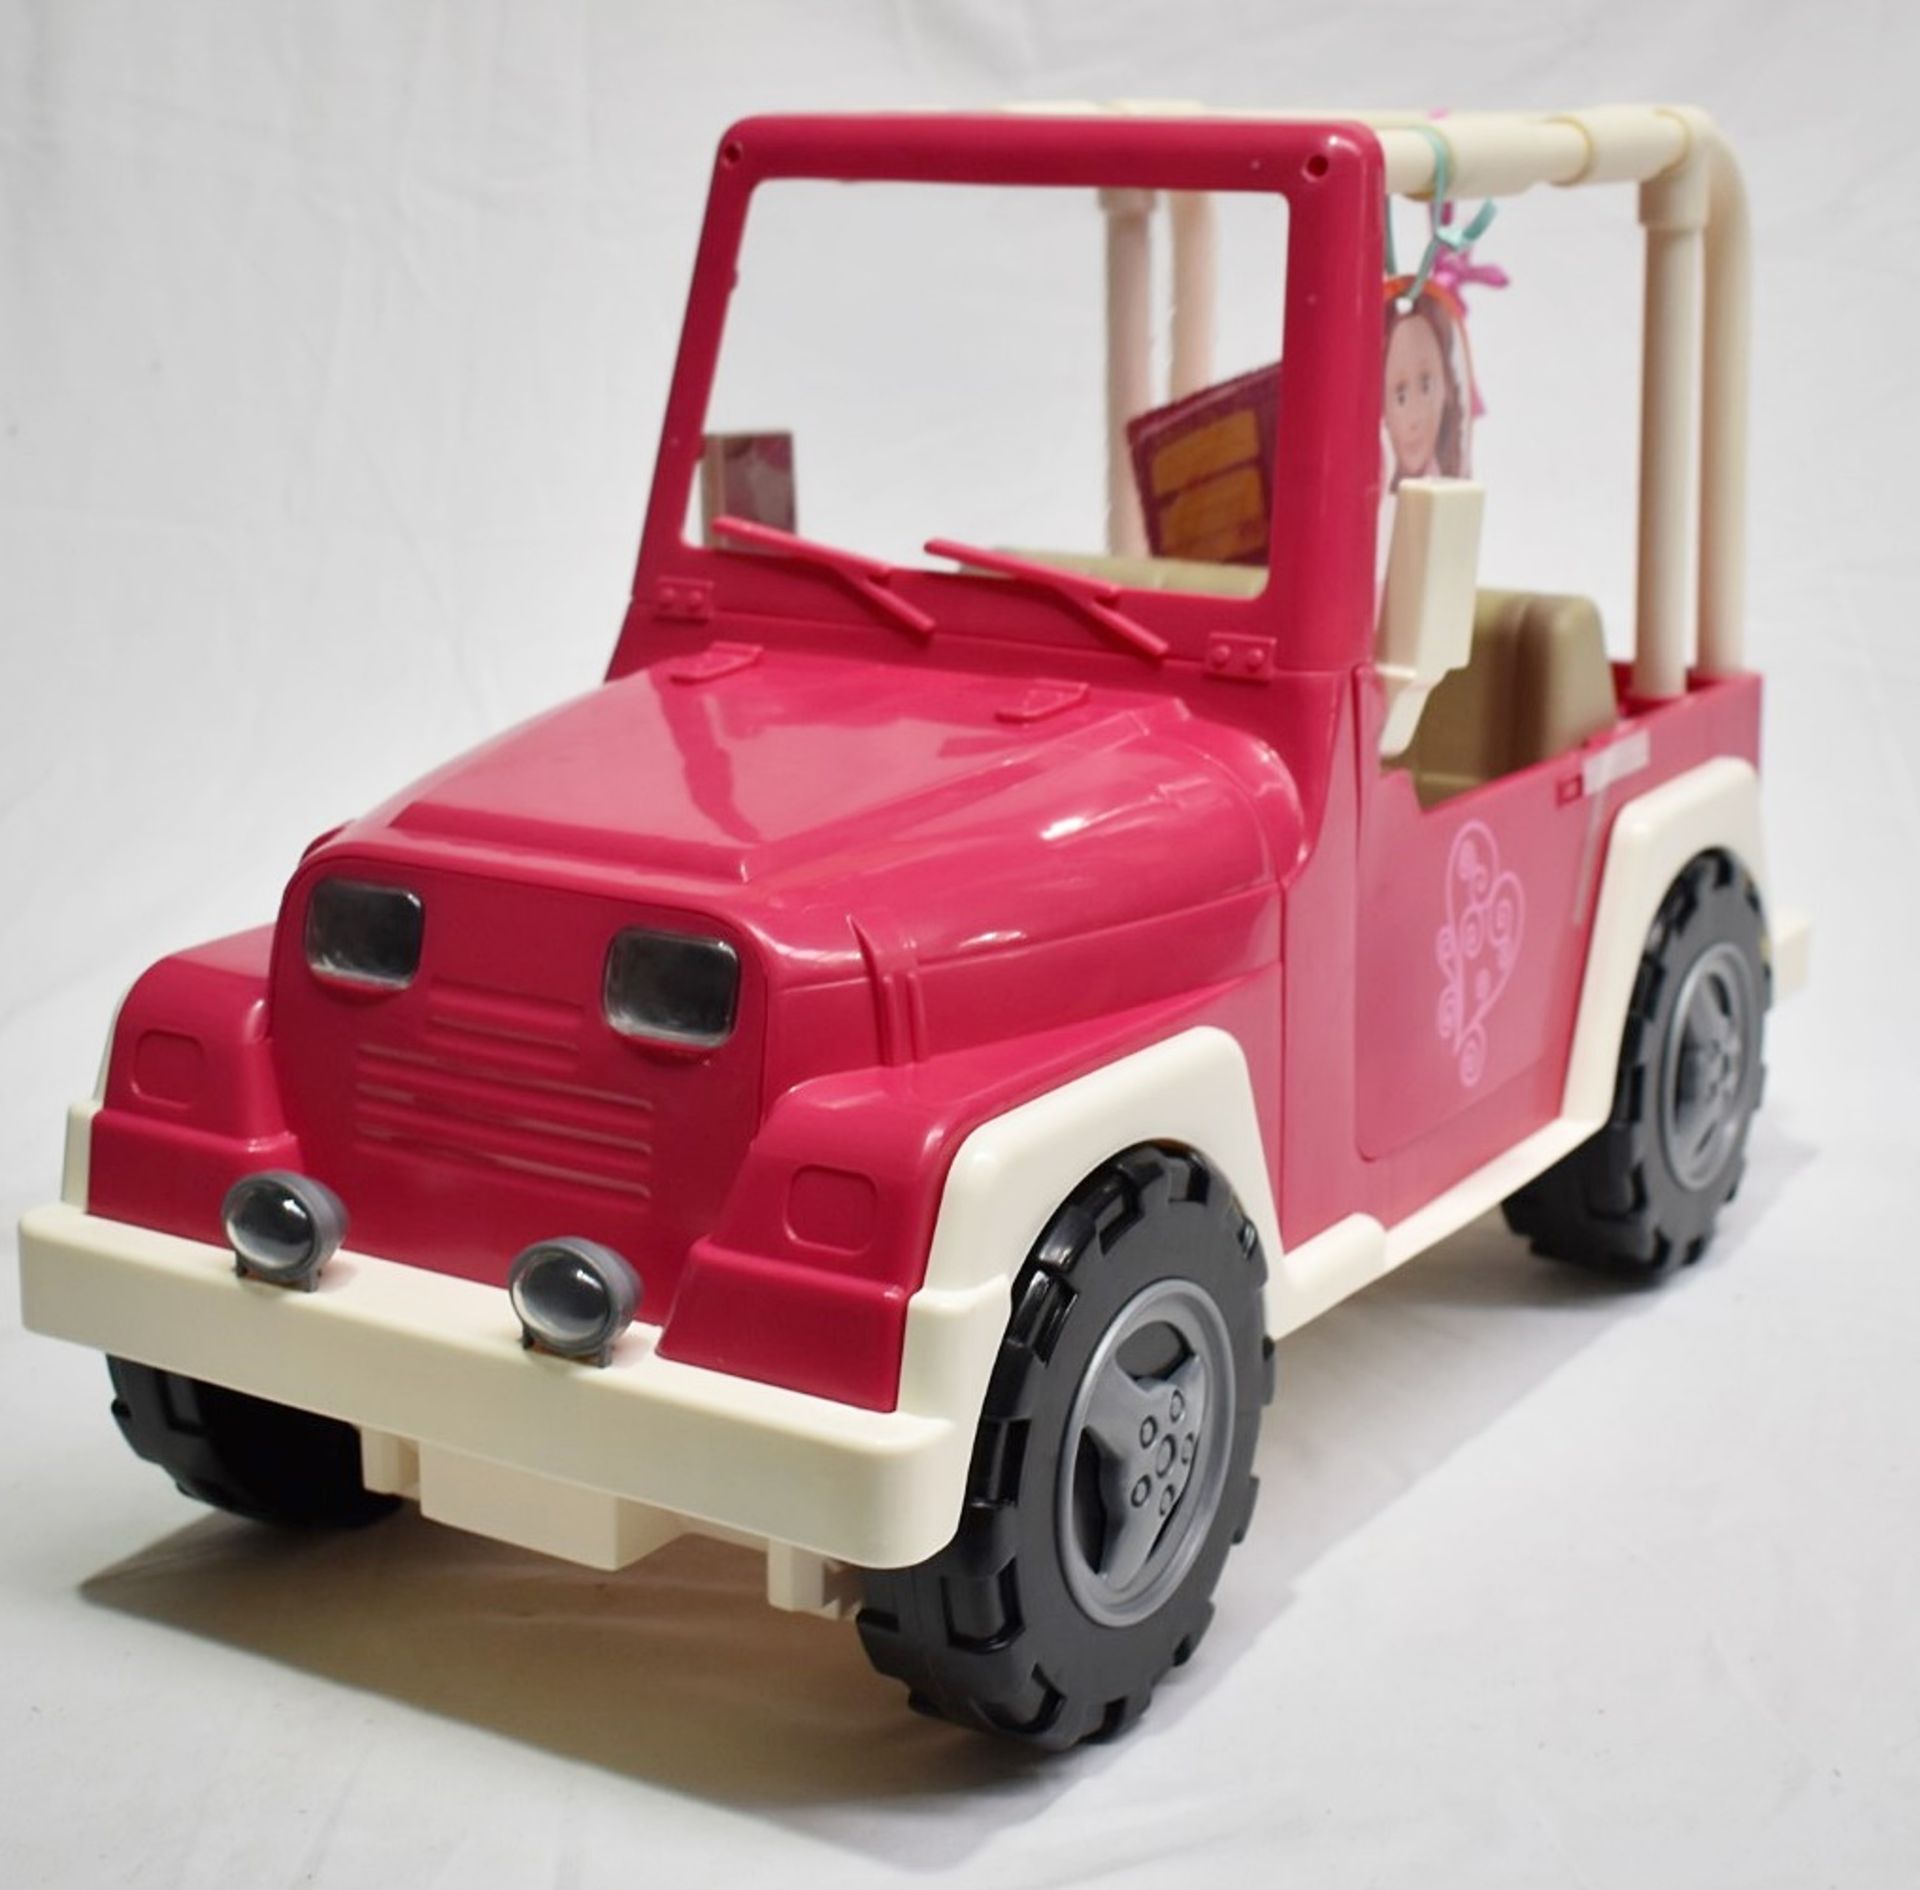 1 x OUR GENERATION 4x4 Off Roader Toy with Built-in Bluetooth Speakers - Original Price £169.00 - Image 4 of 5